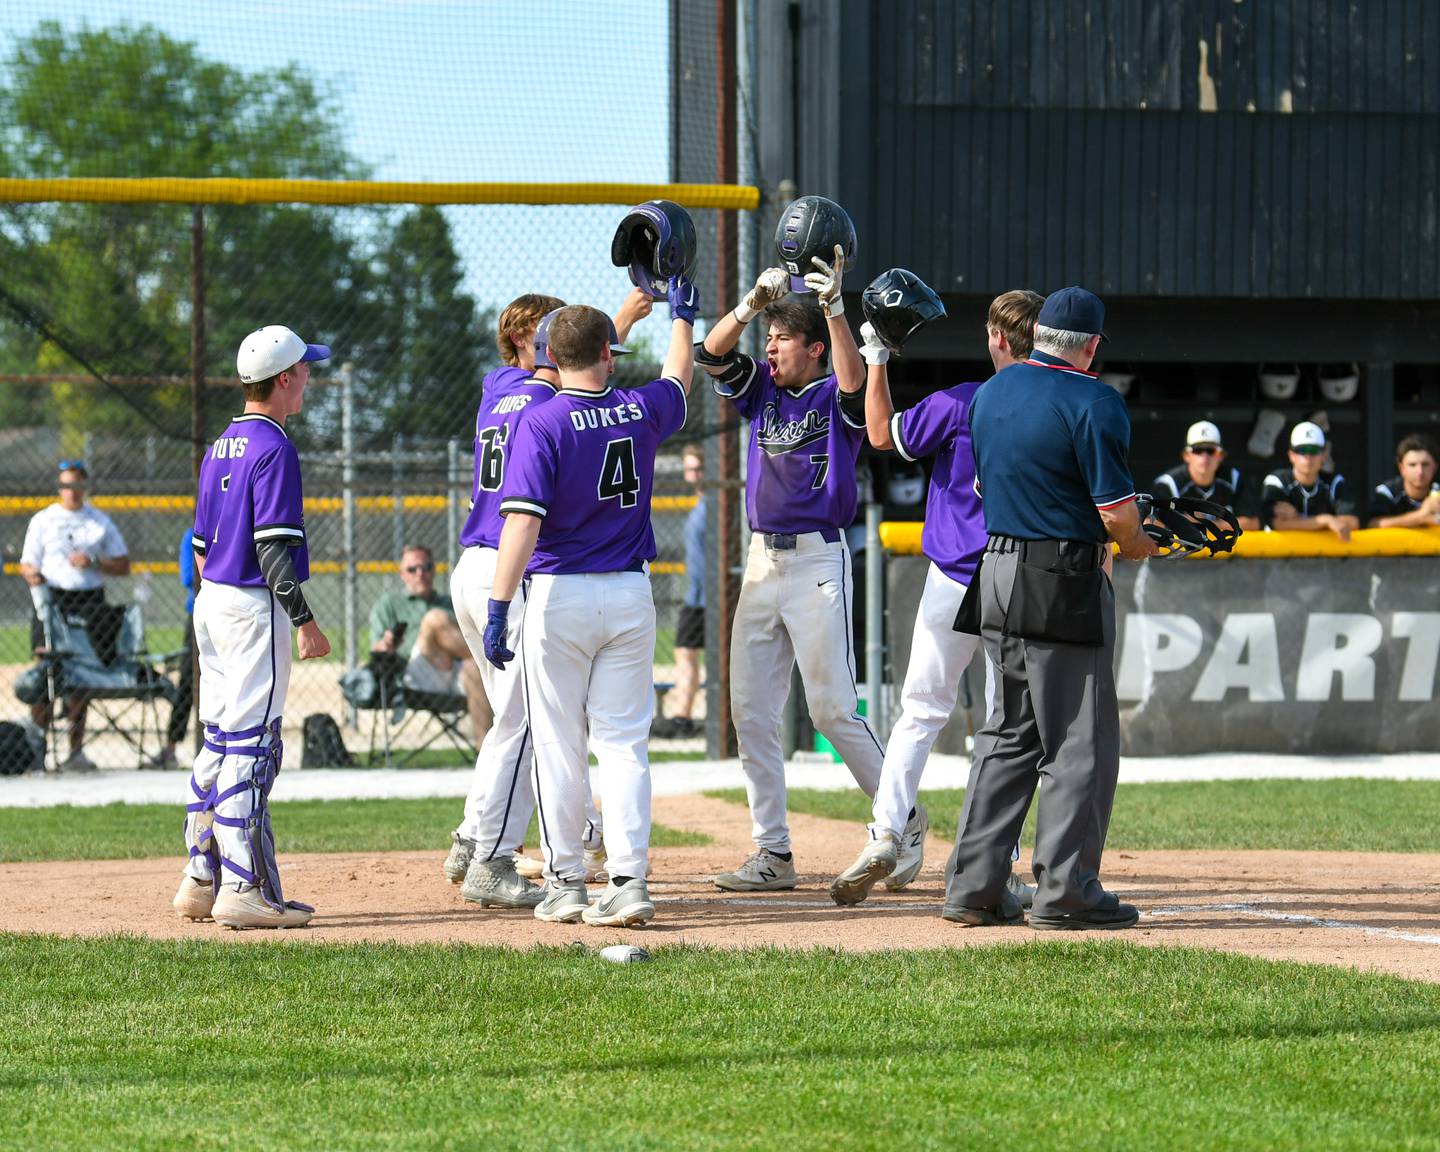 Dixon's Gage Burdick gets congratulated by teammates as he hits a home run to tie the game 5-5 while taking on Kaneland High School during a sectional playoff game held in Sycamore.